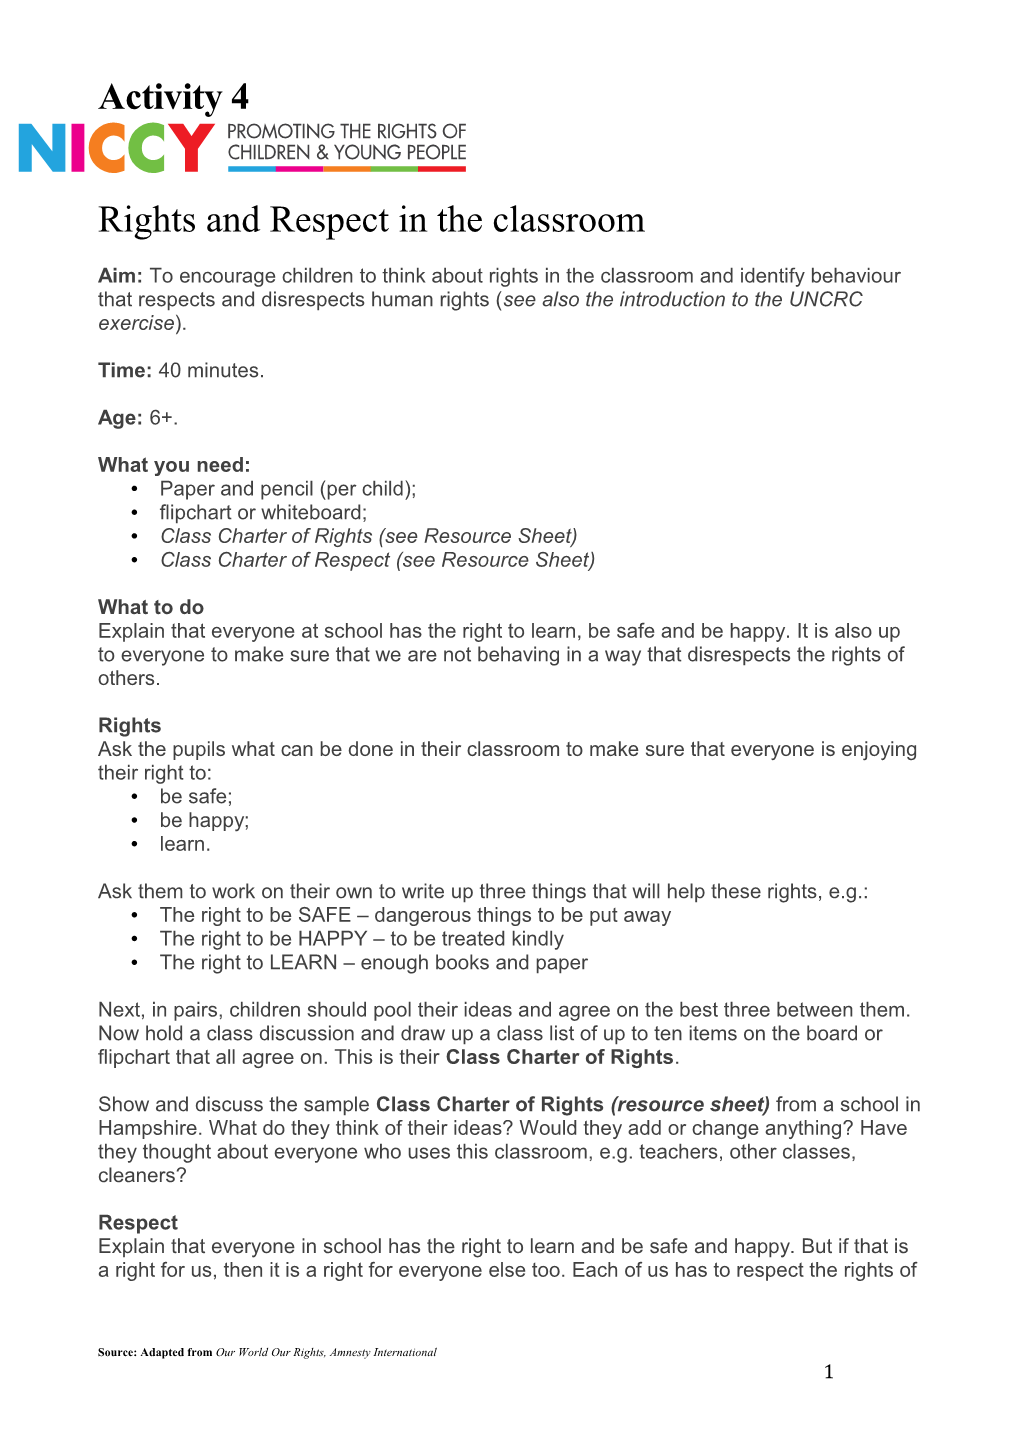 Rights and Respect in the Classroom